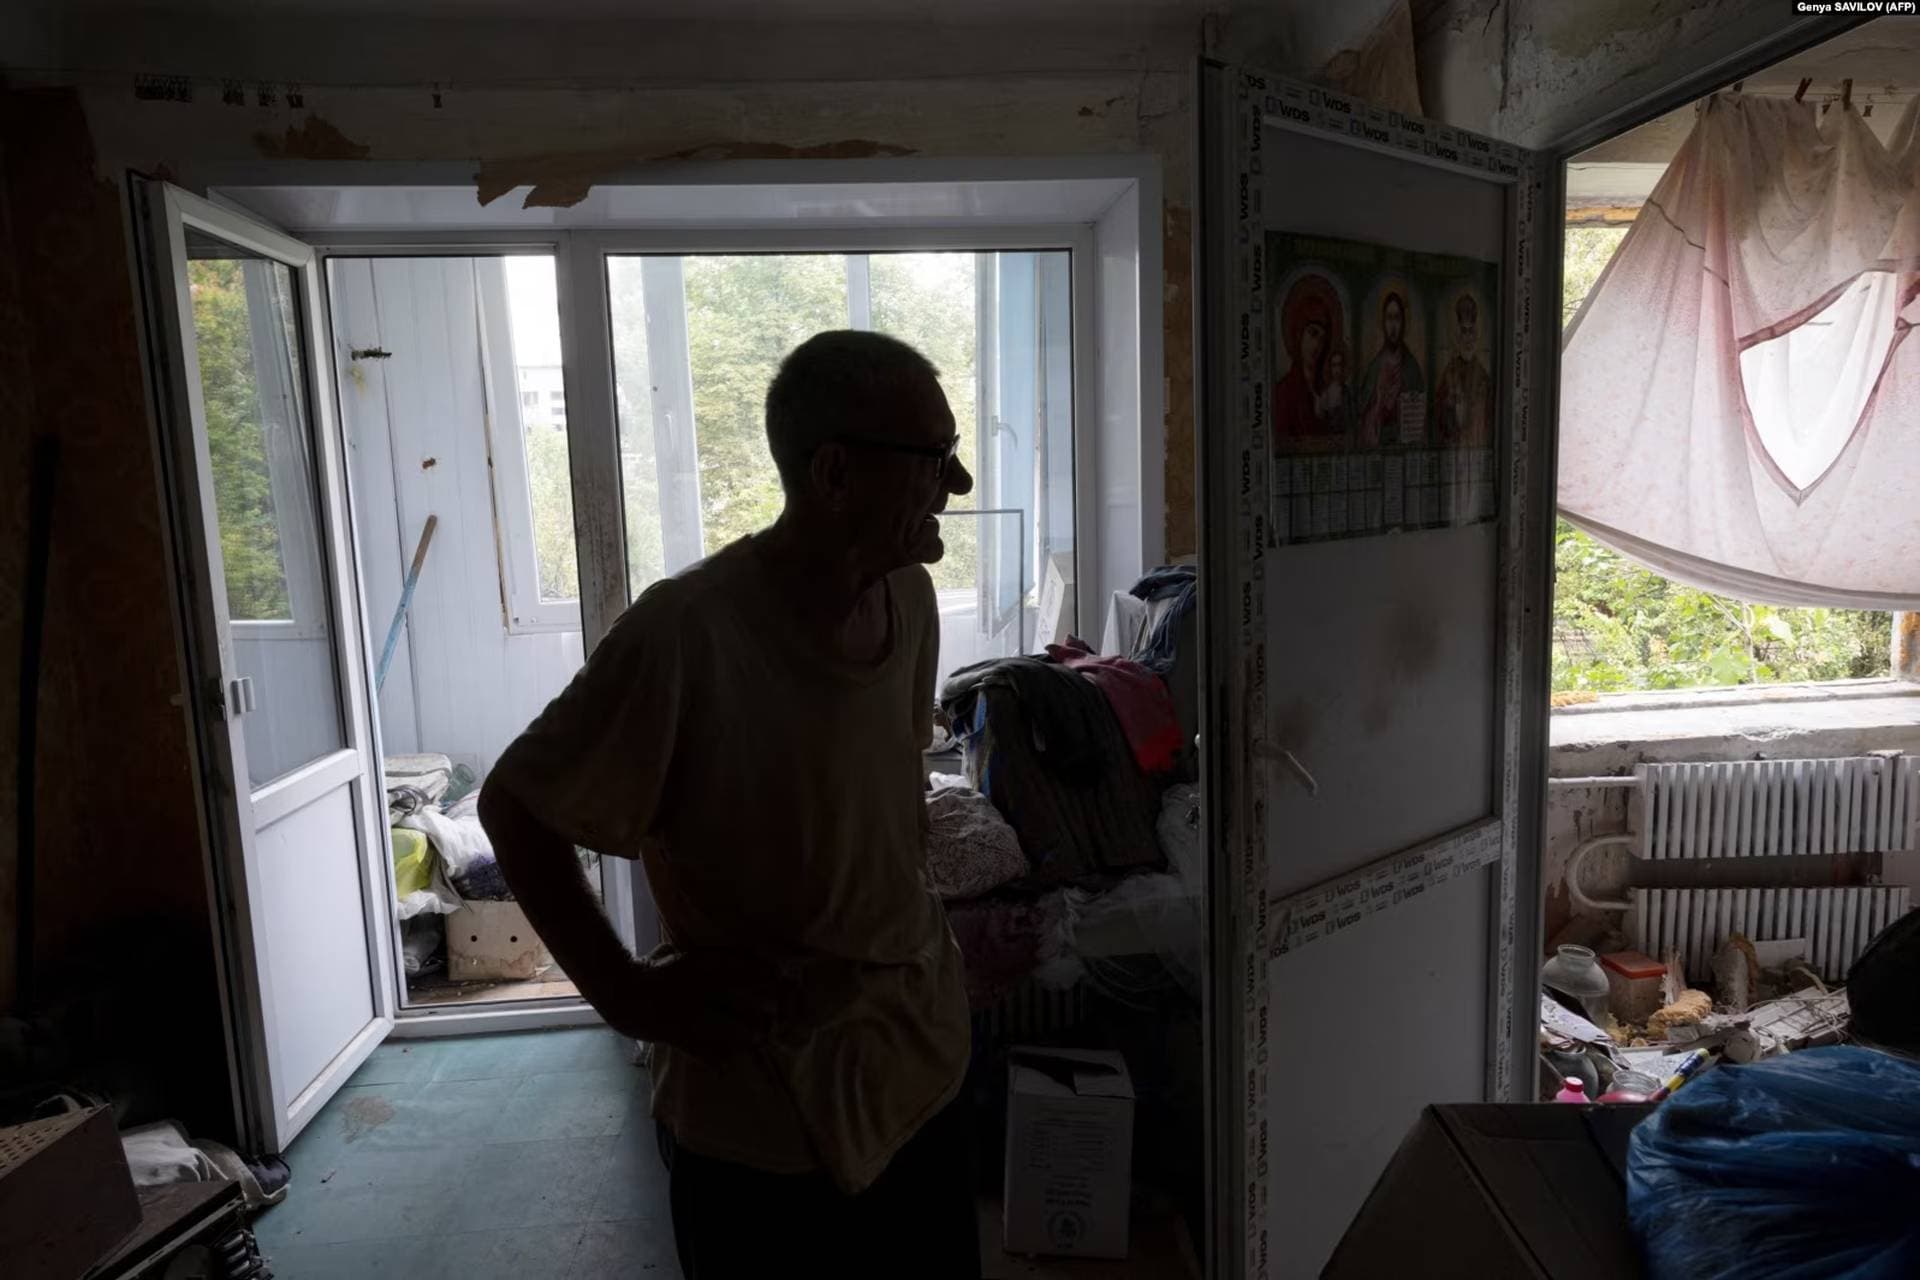 Local resident is living in his shattered apartment without windows